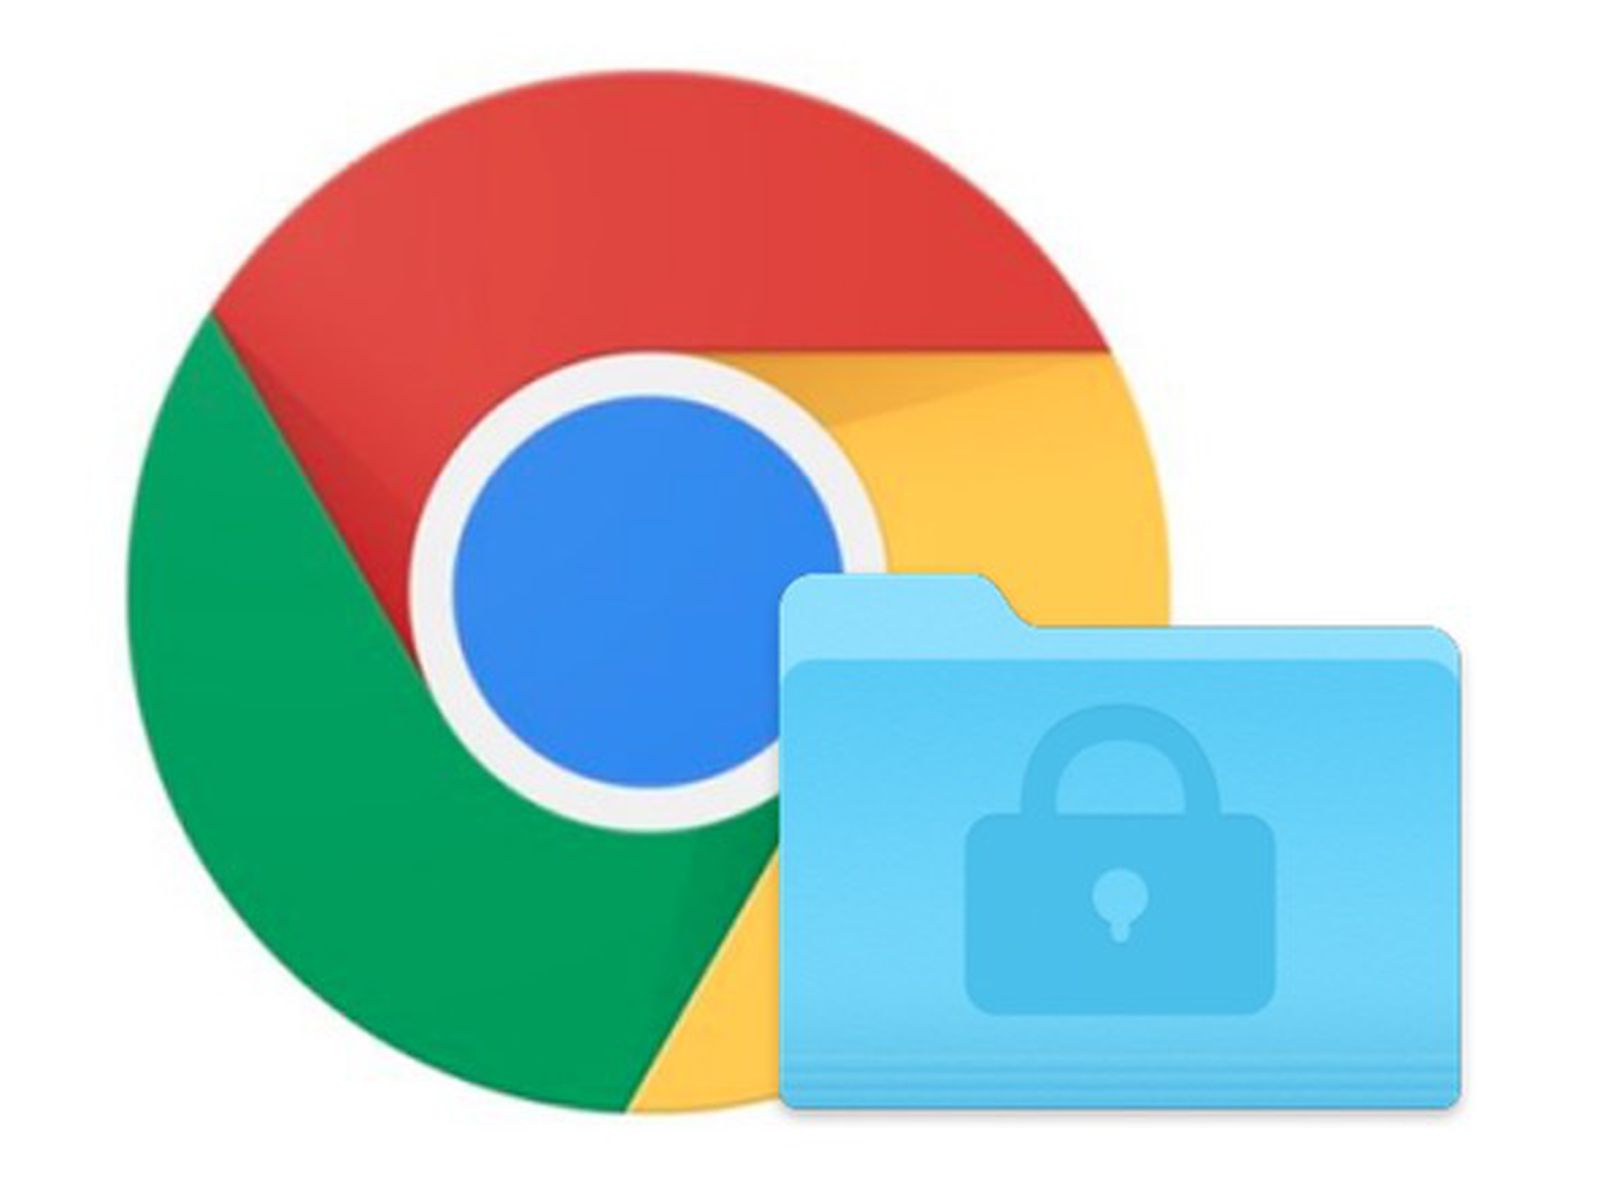 how to download google chrome on macbook air 2020